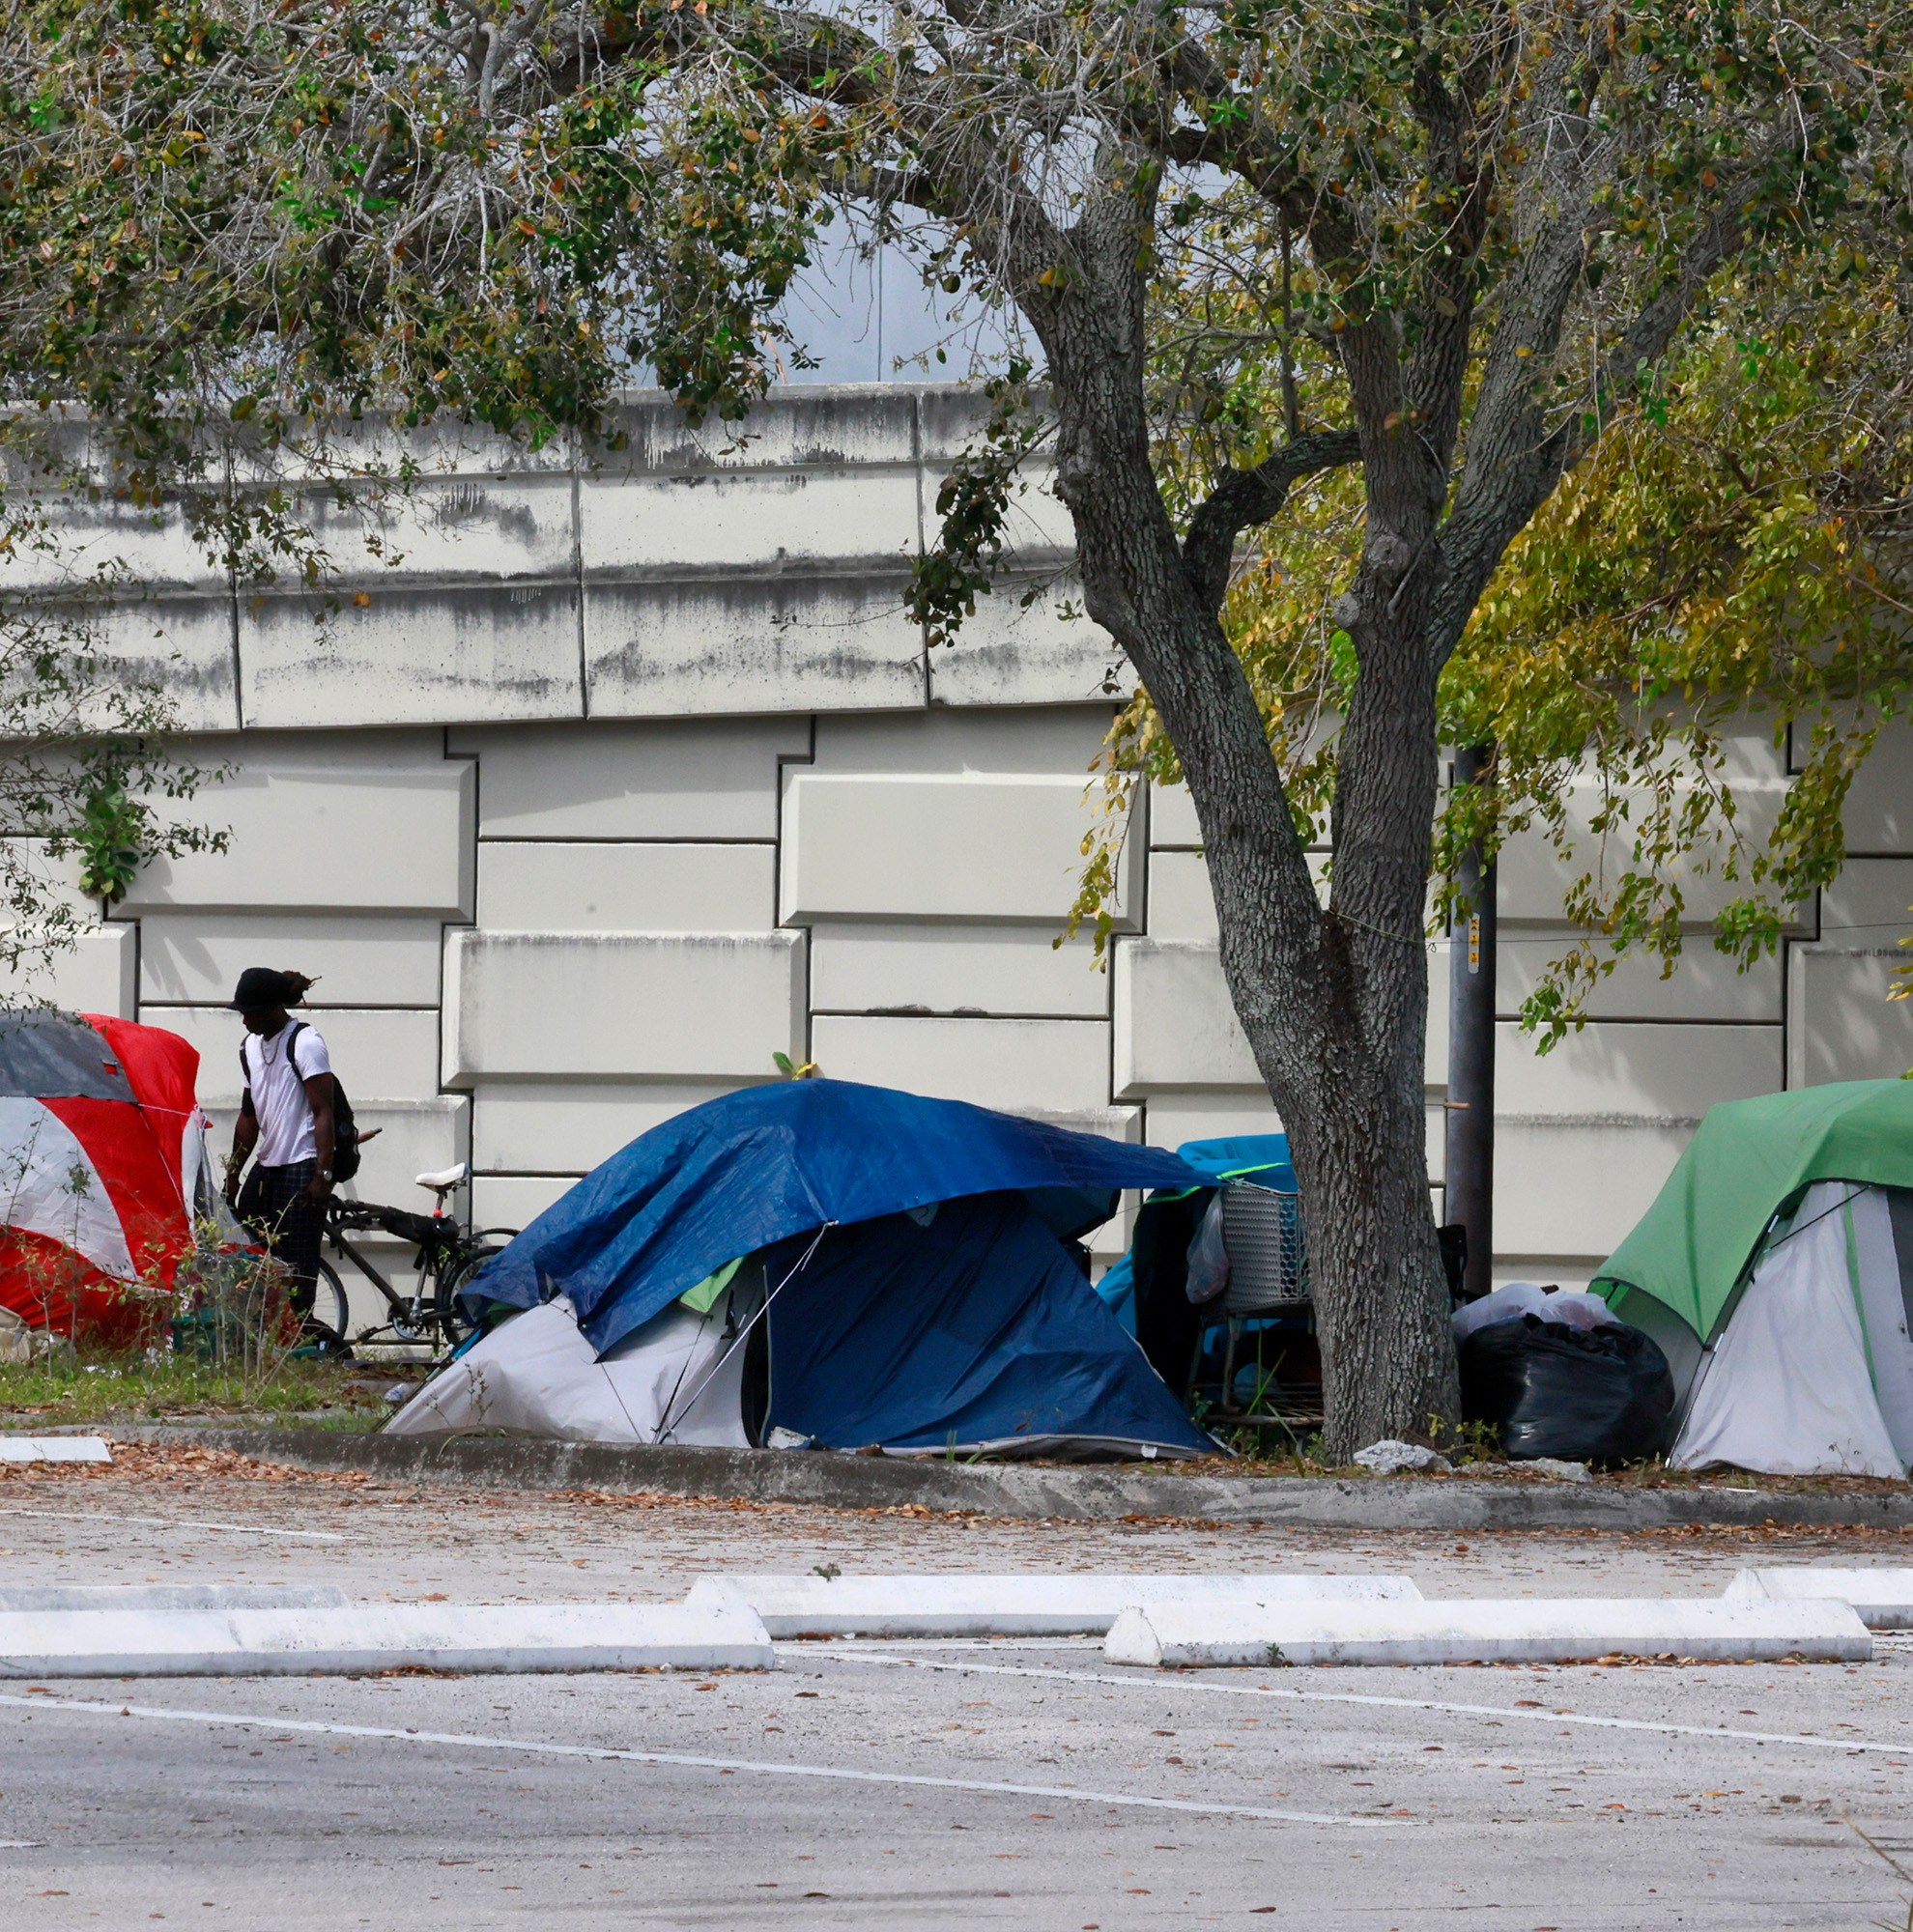 What the Supreme Court case on tent encampments could mean for homeless people